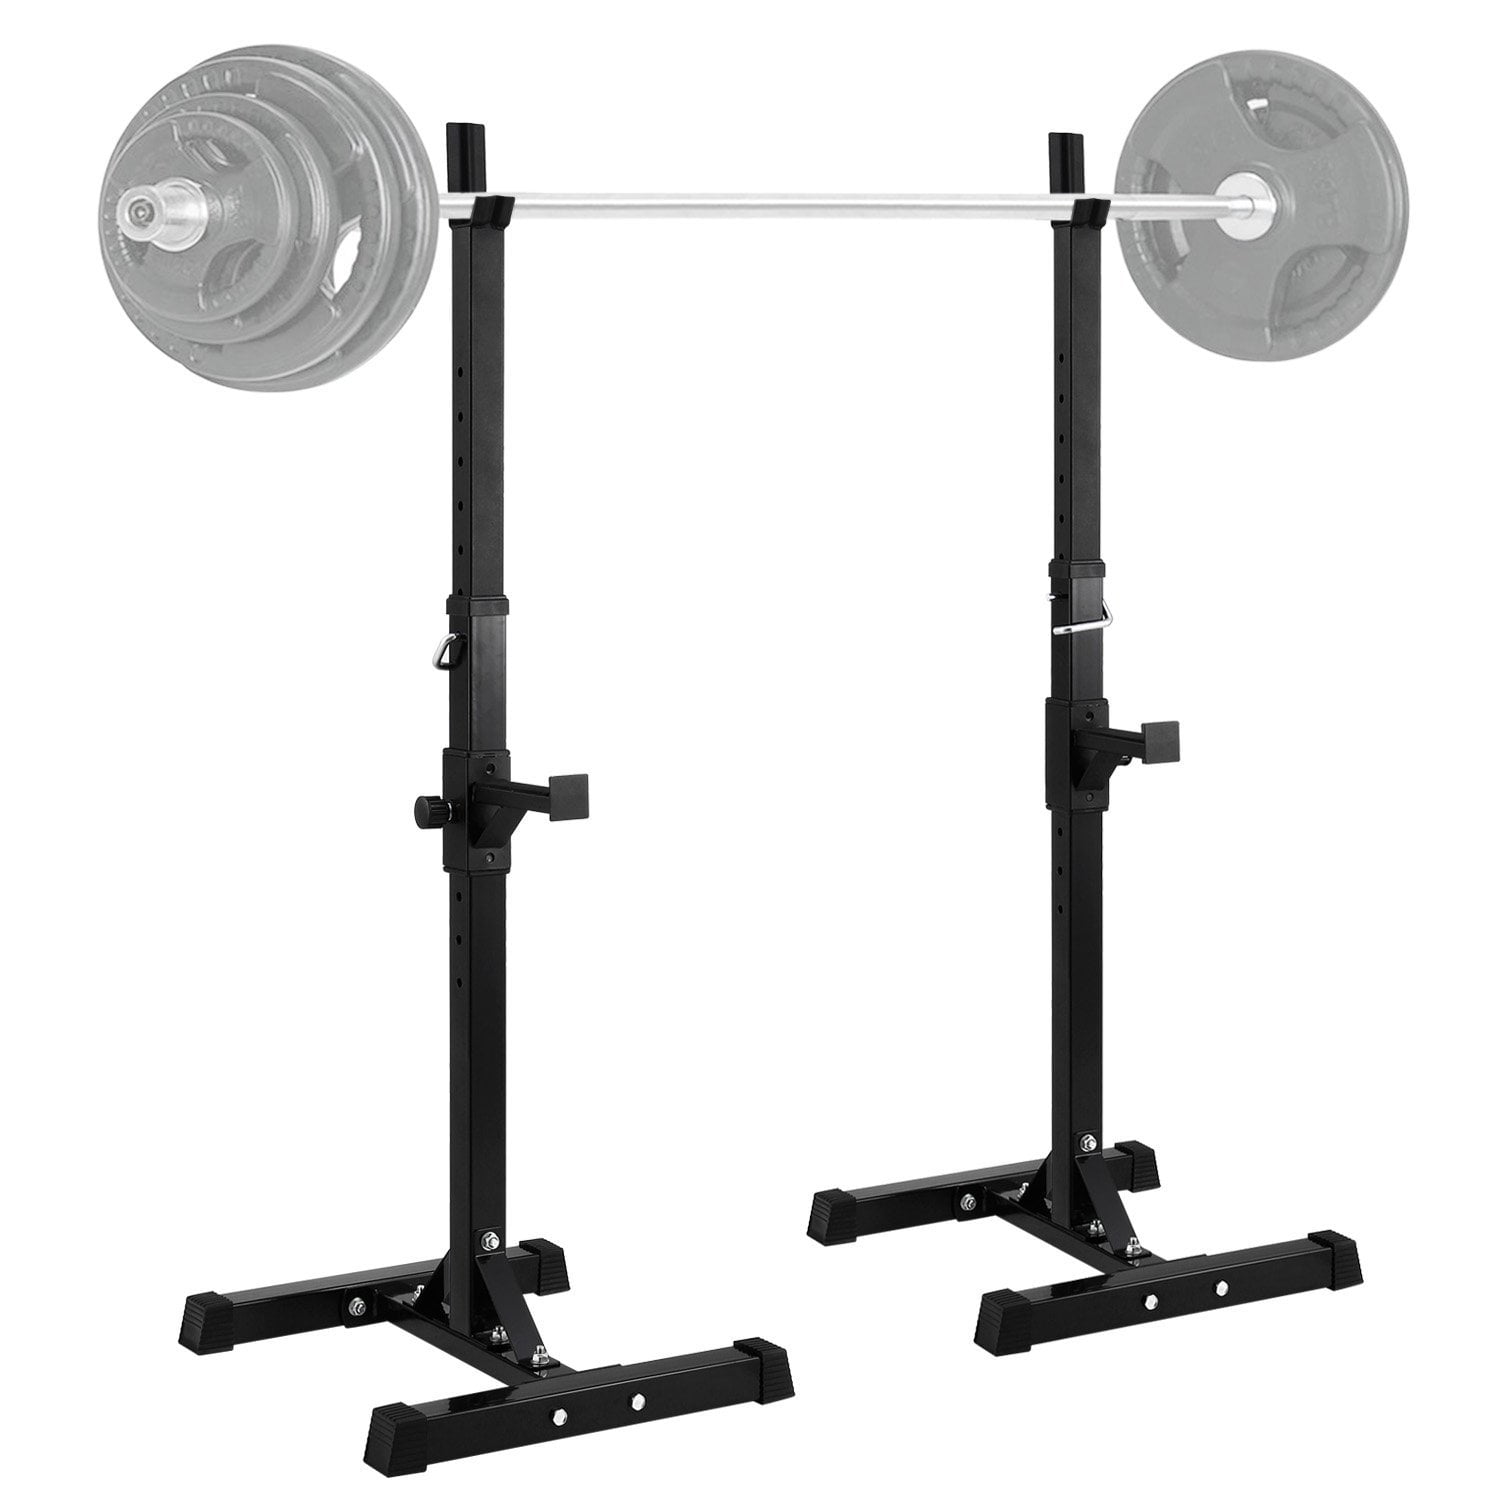 Adjustable Squat Rack Stand with Shelf for Weights Hop-Sport HS-1005L Barbell Rack Stand Free Bench Press for Bodybuilding Capacity up to 250kg 